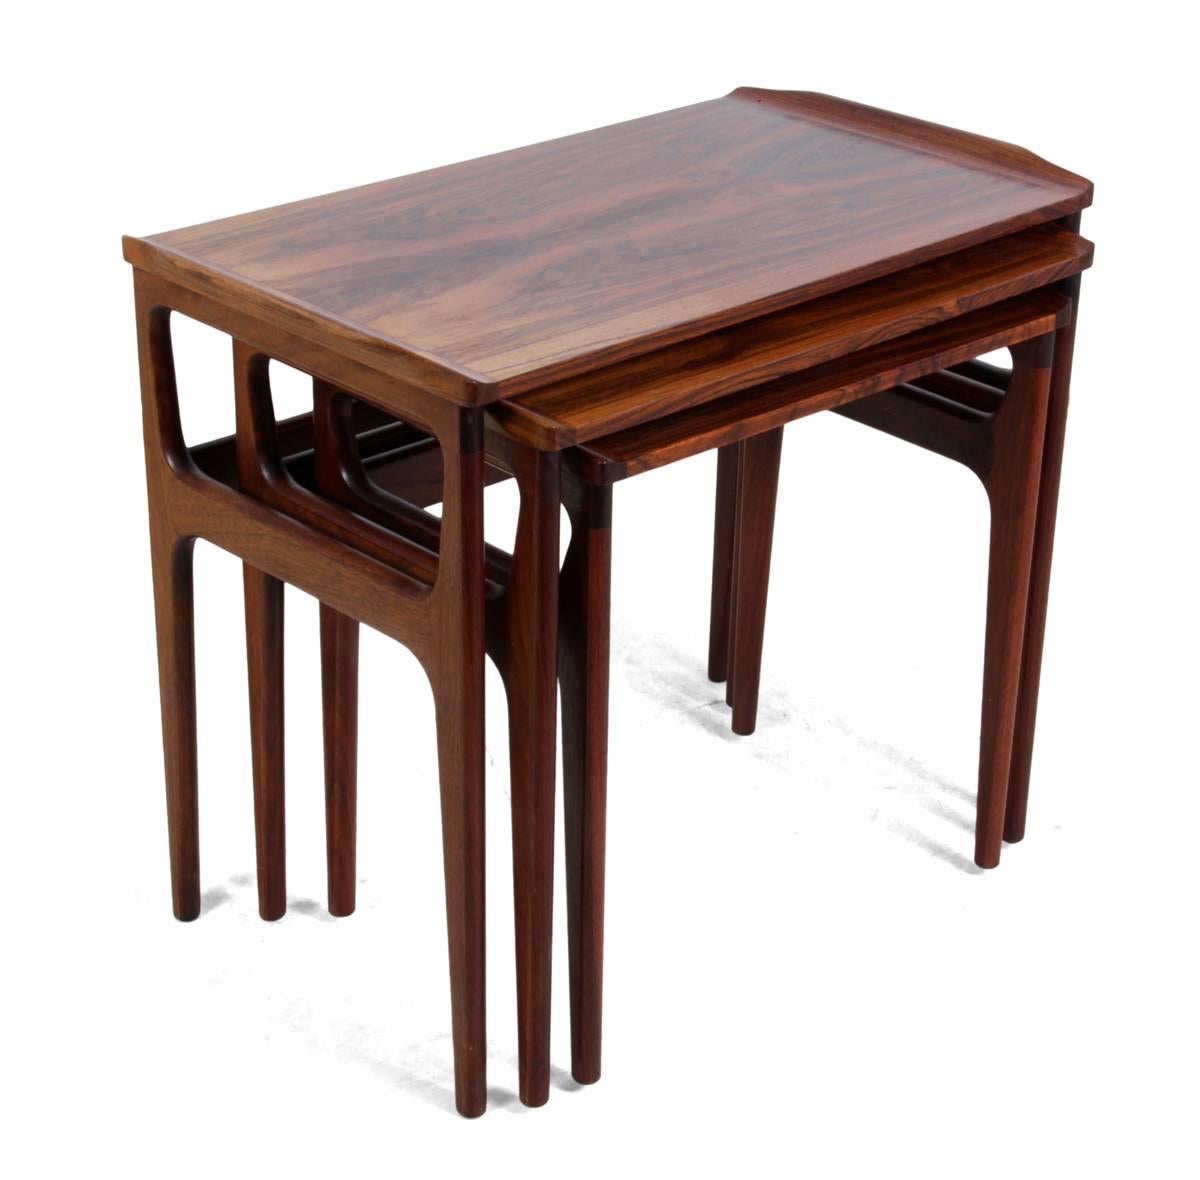 Three Rosewood Nesting Tables by Domus Danica In Excellent Condition For Sale In Paddock Wood, Kent